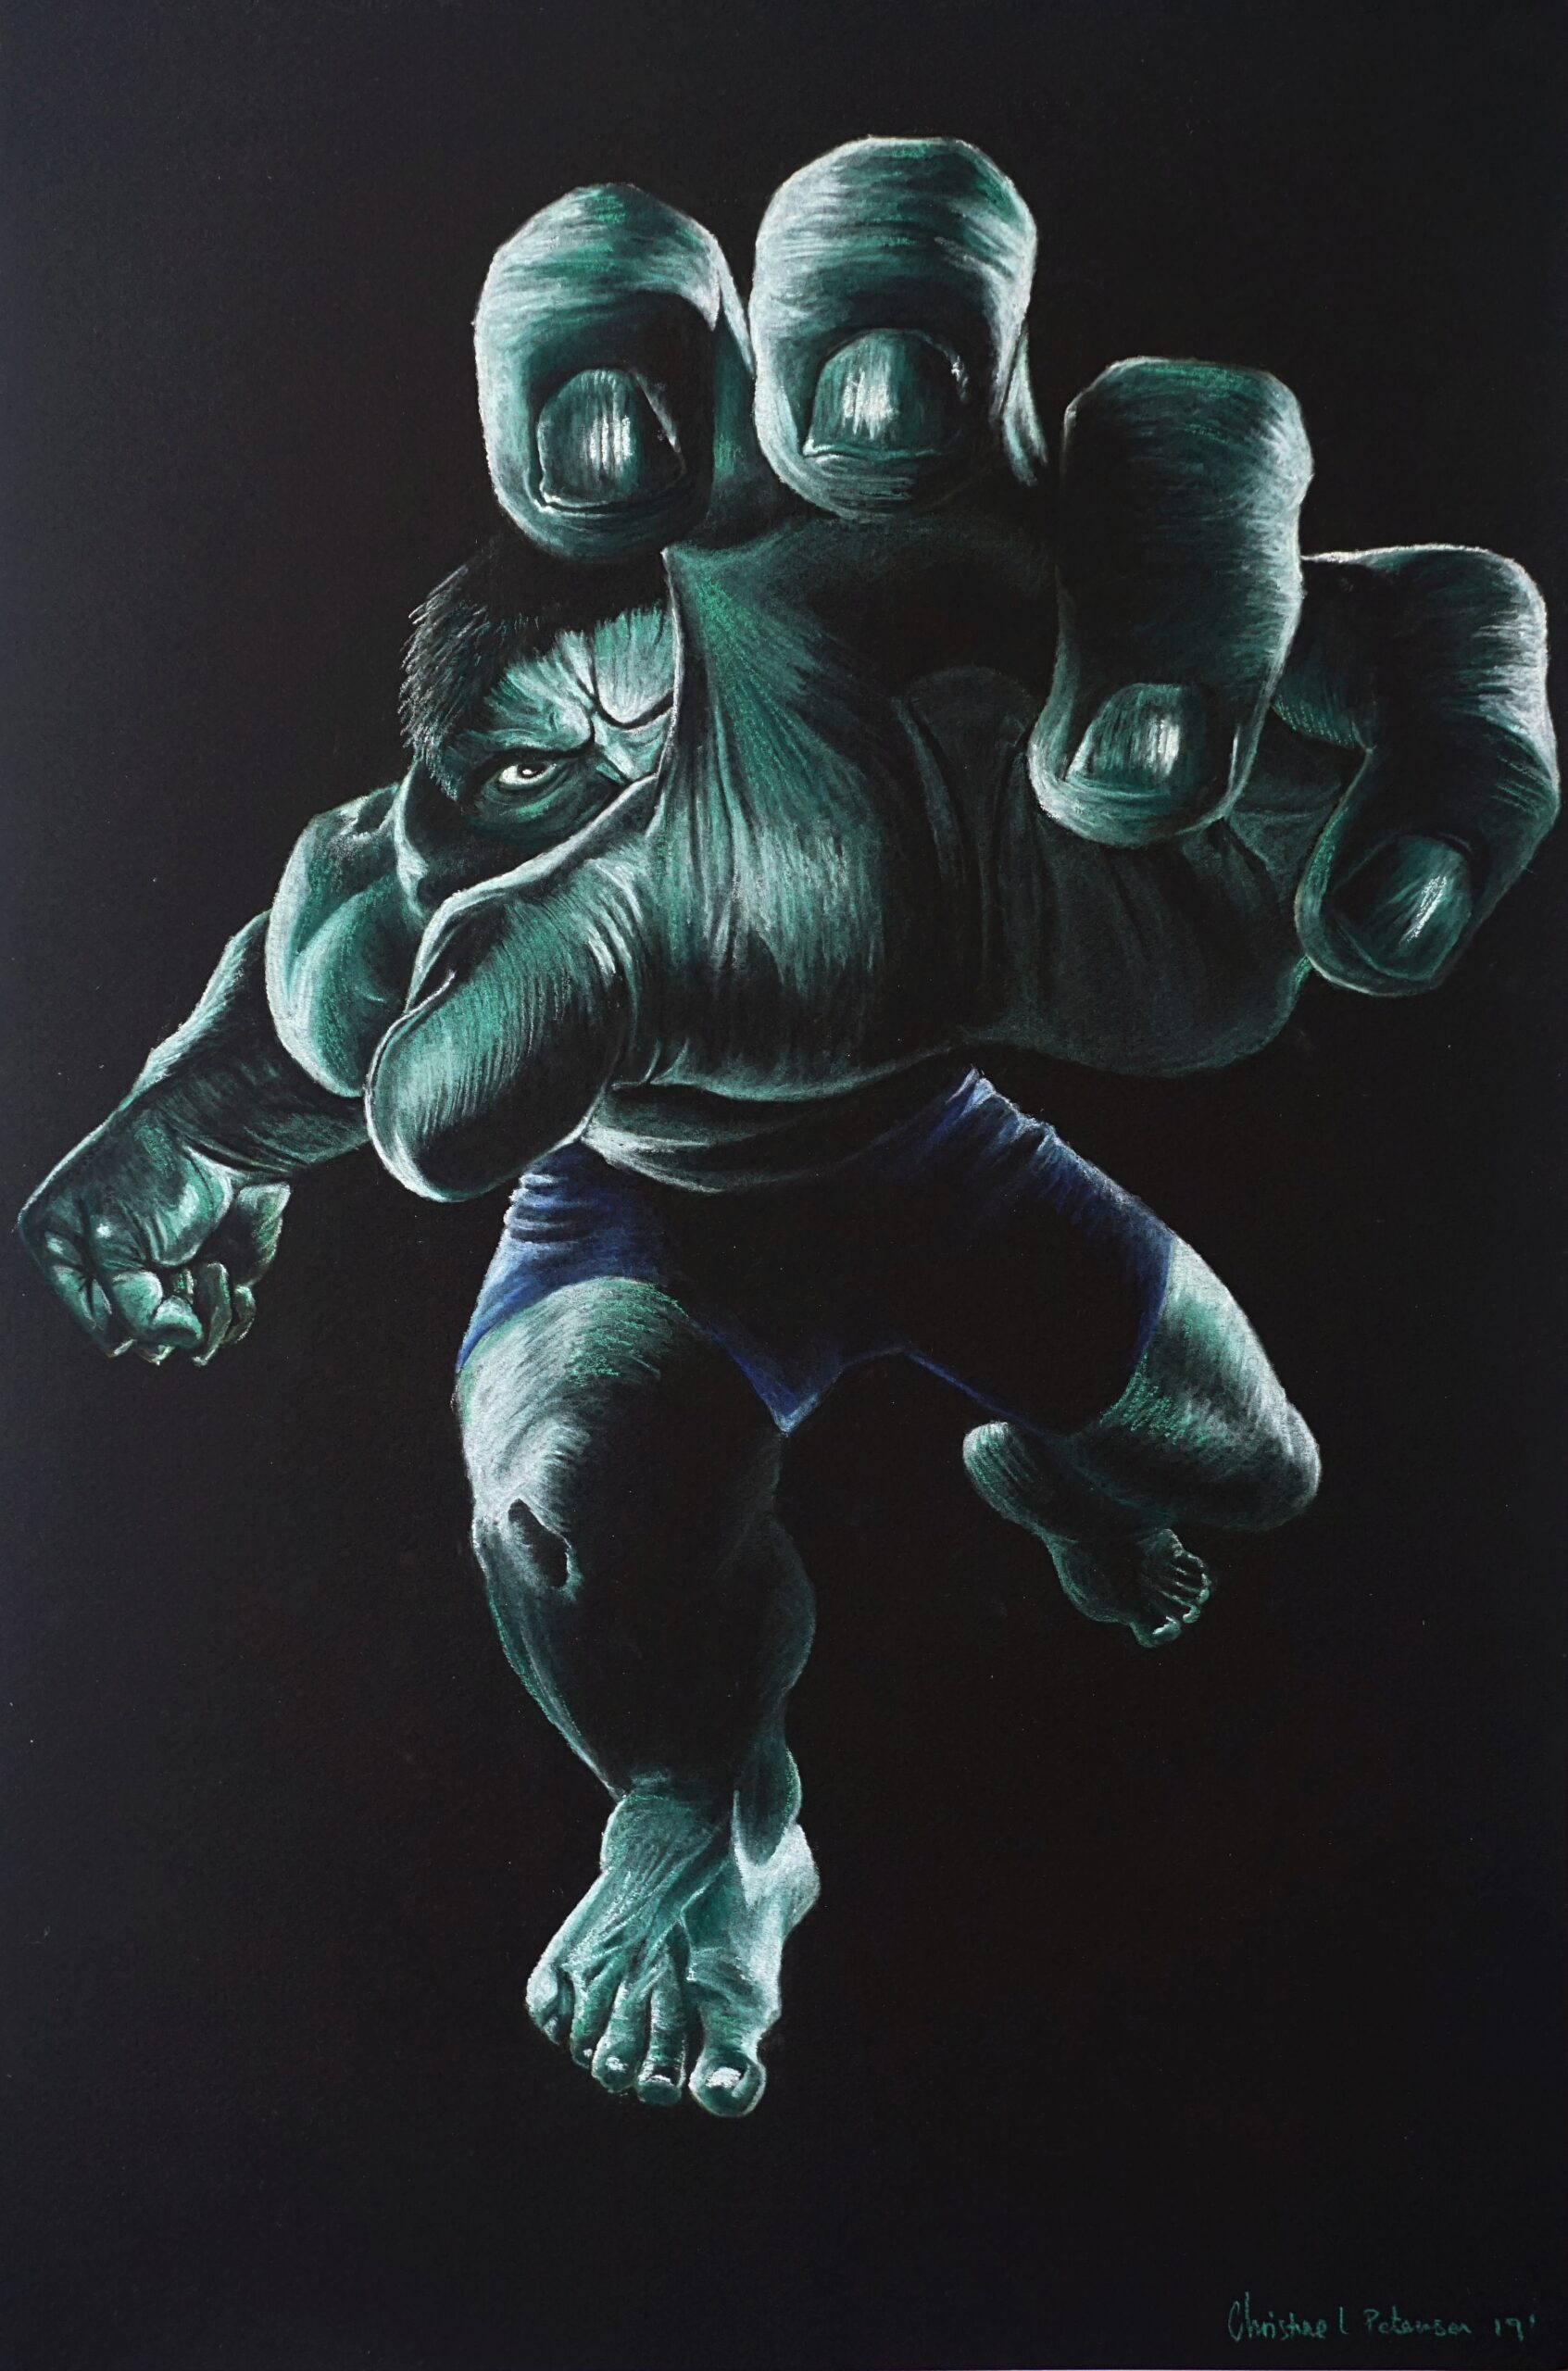 Black and white pastel drawing of The Hulk